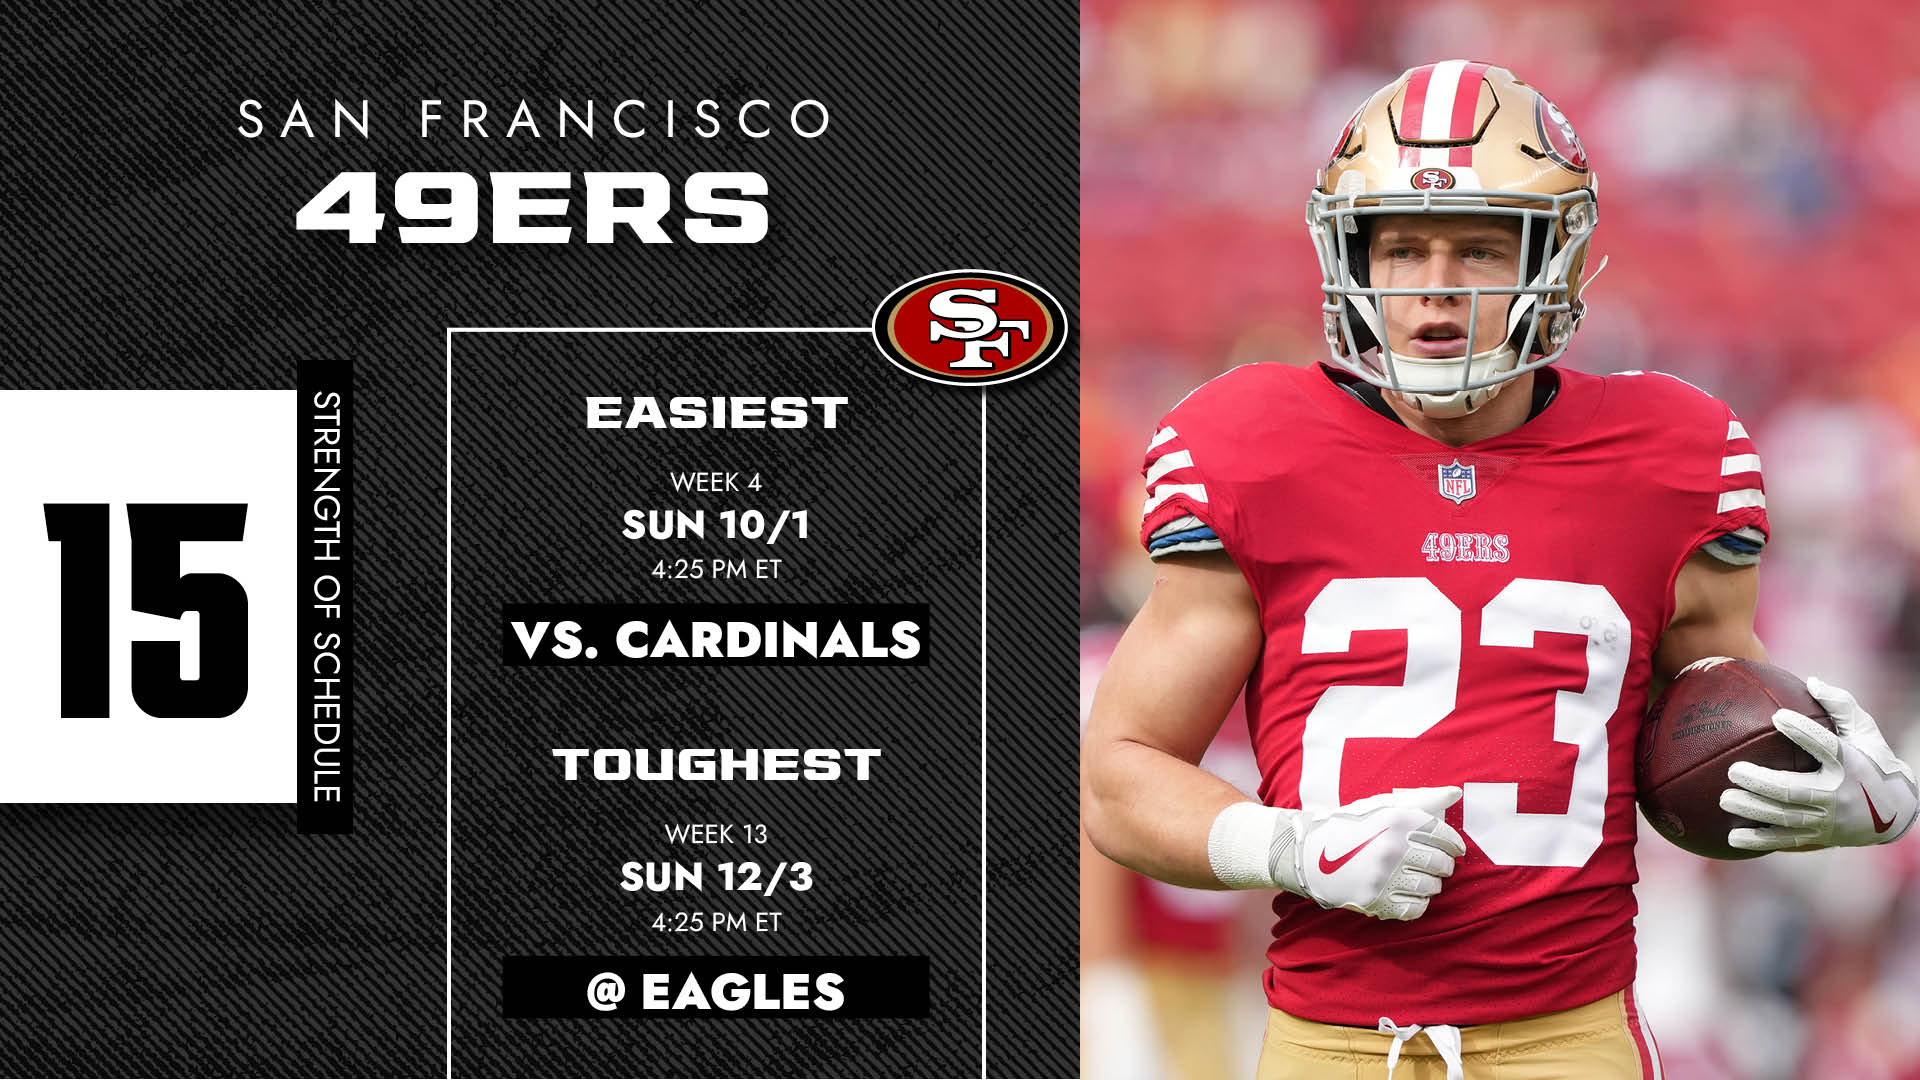 who is the 49ers playing this weekend